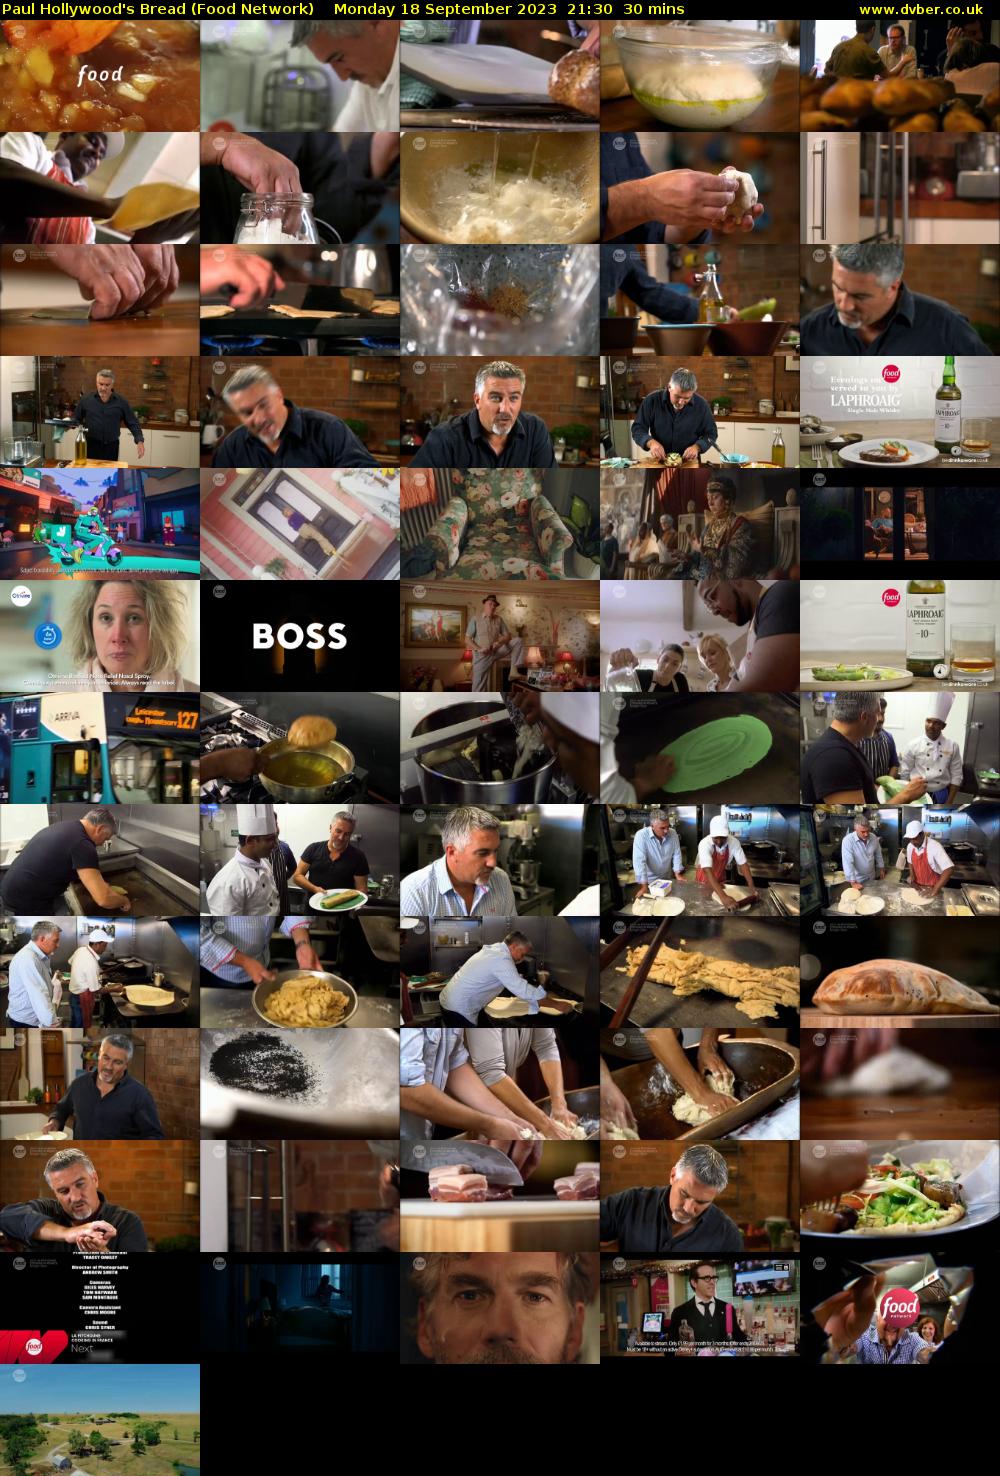 Paul Hollywood's Bread (Food Network) Monday 18 September 2023 21:30 - 22:00